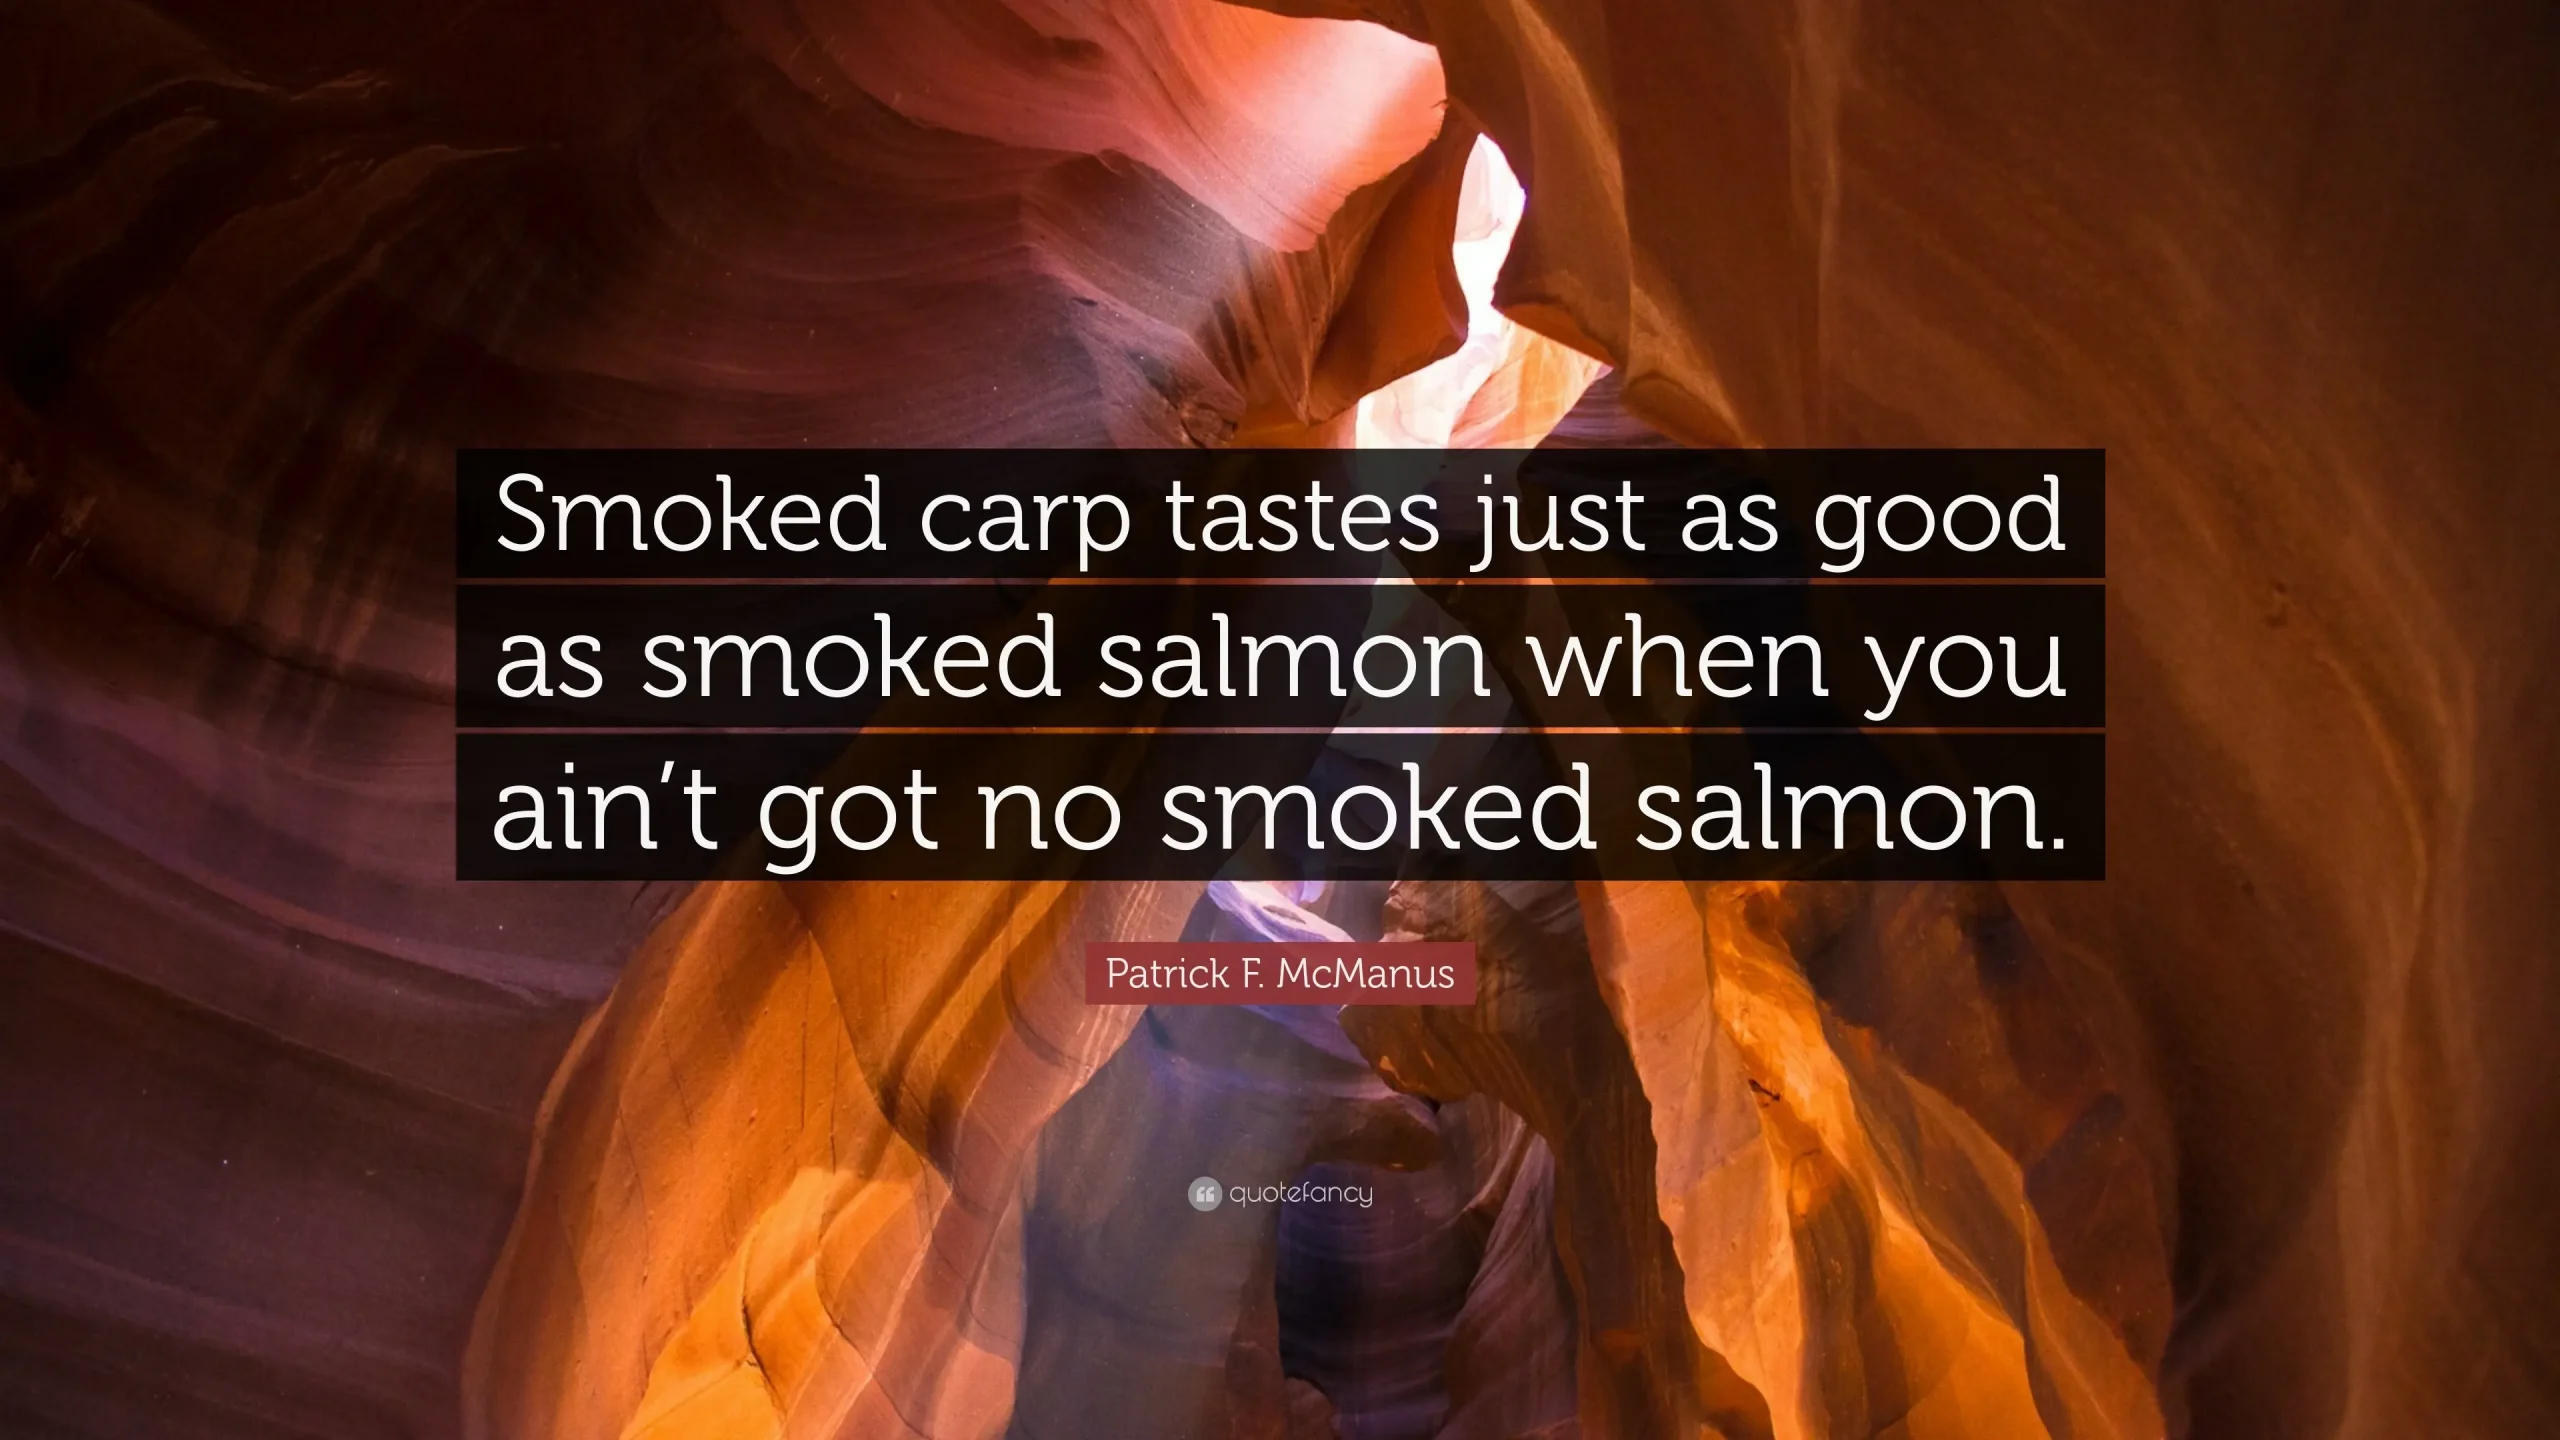 smoked salmon quotes - What is a quote about salmon fish